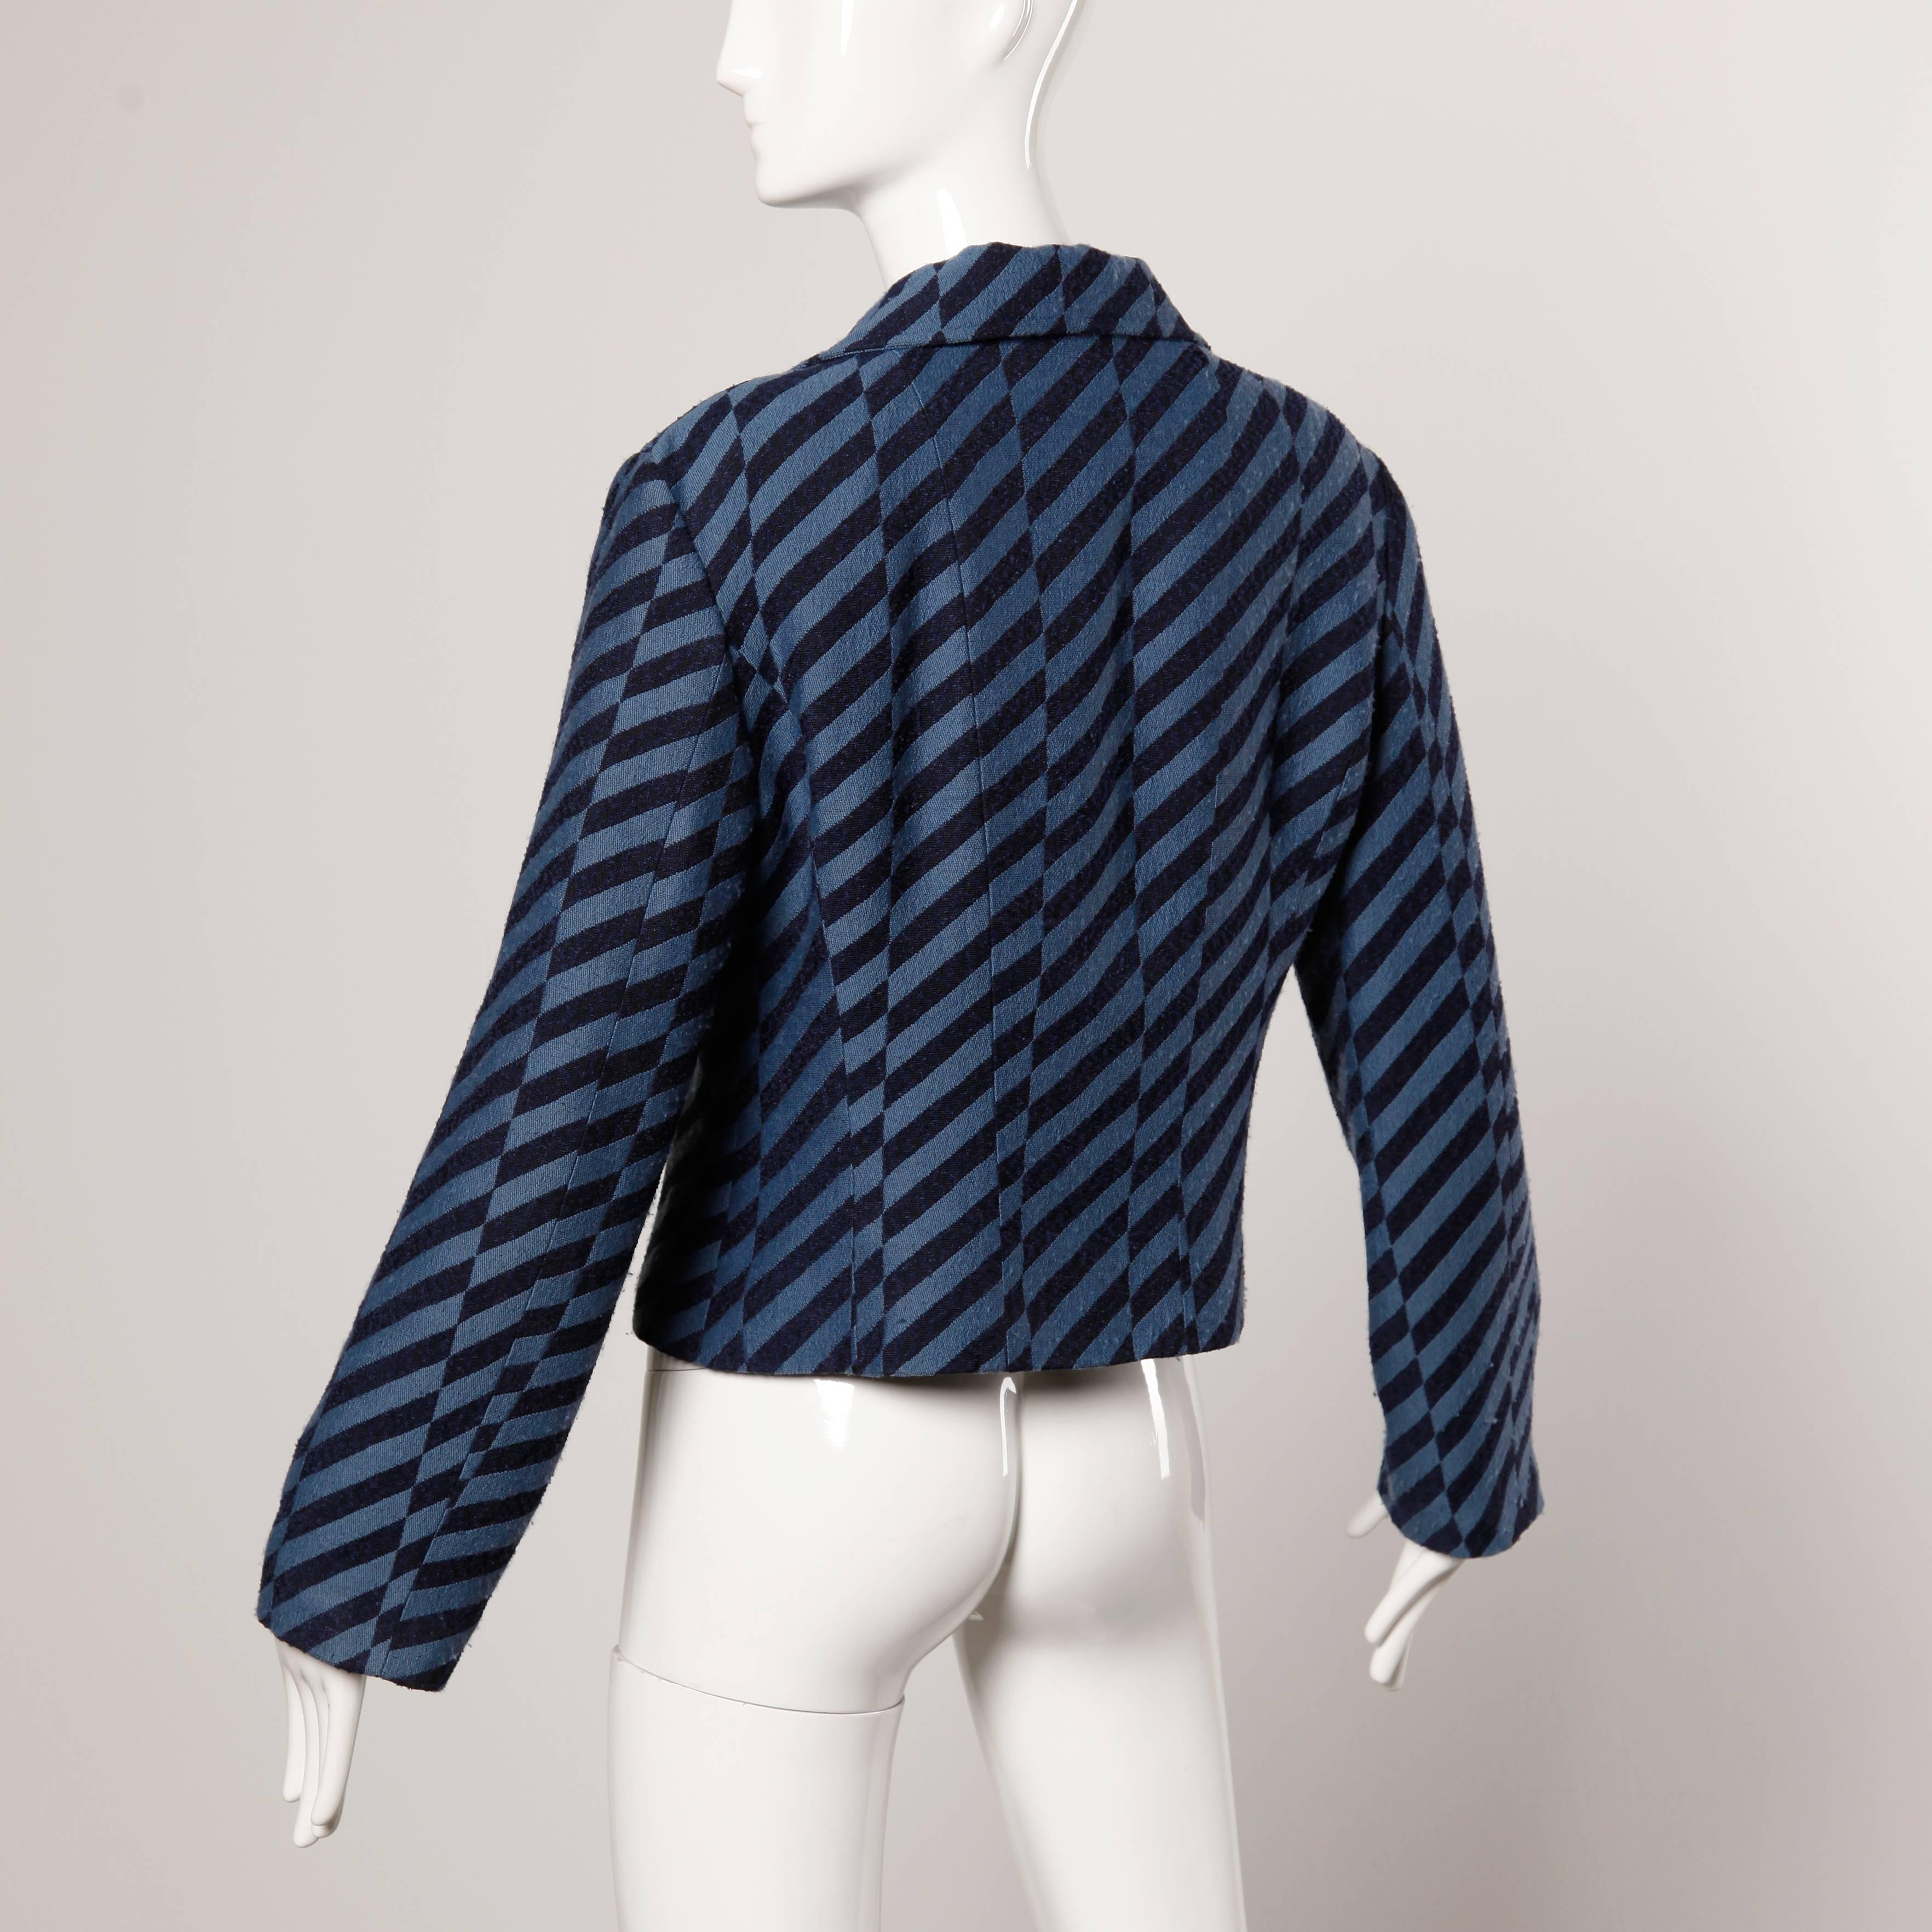 Christian Lacroix Vintage Striped Two Tone Blue Military Jacket, 1980s  For Sale 2